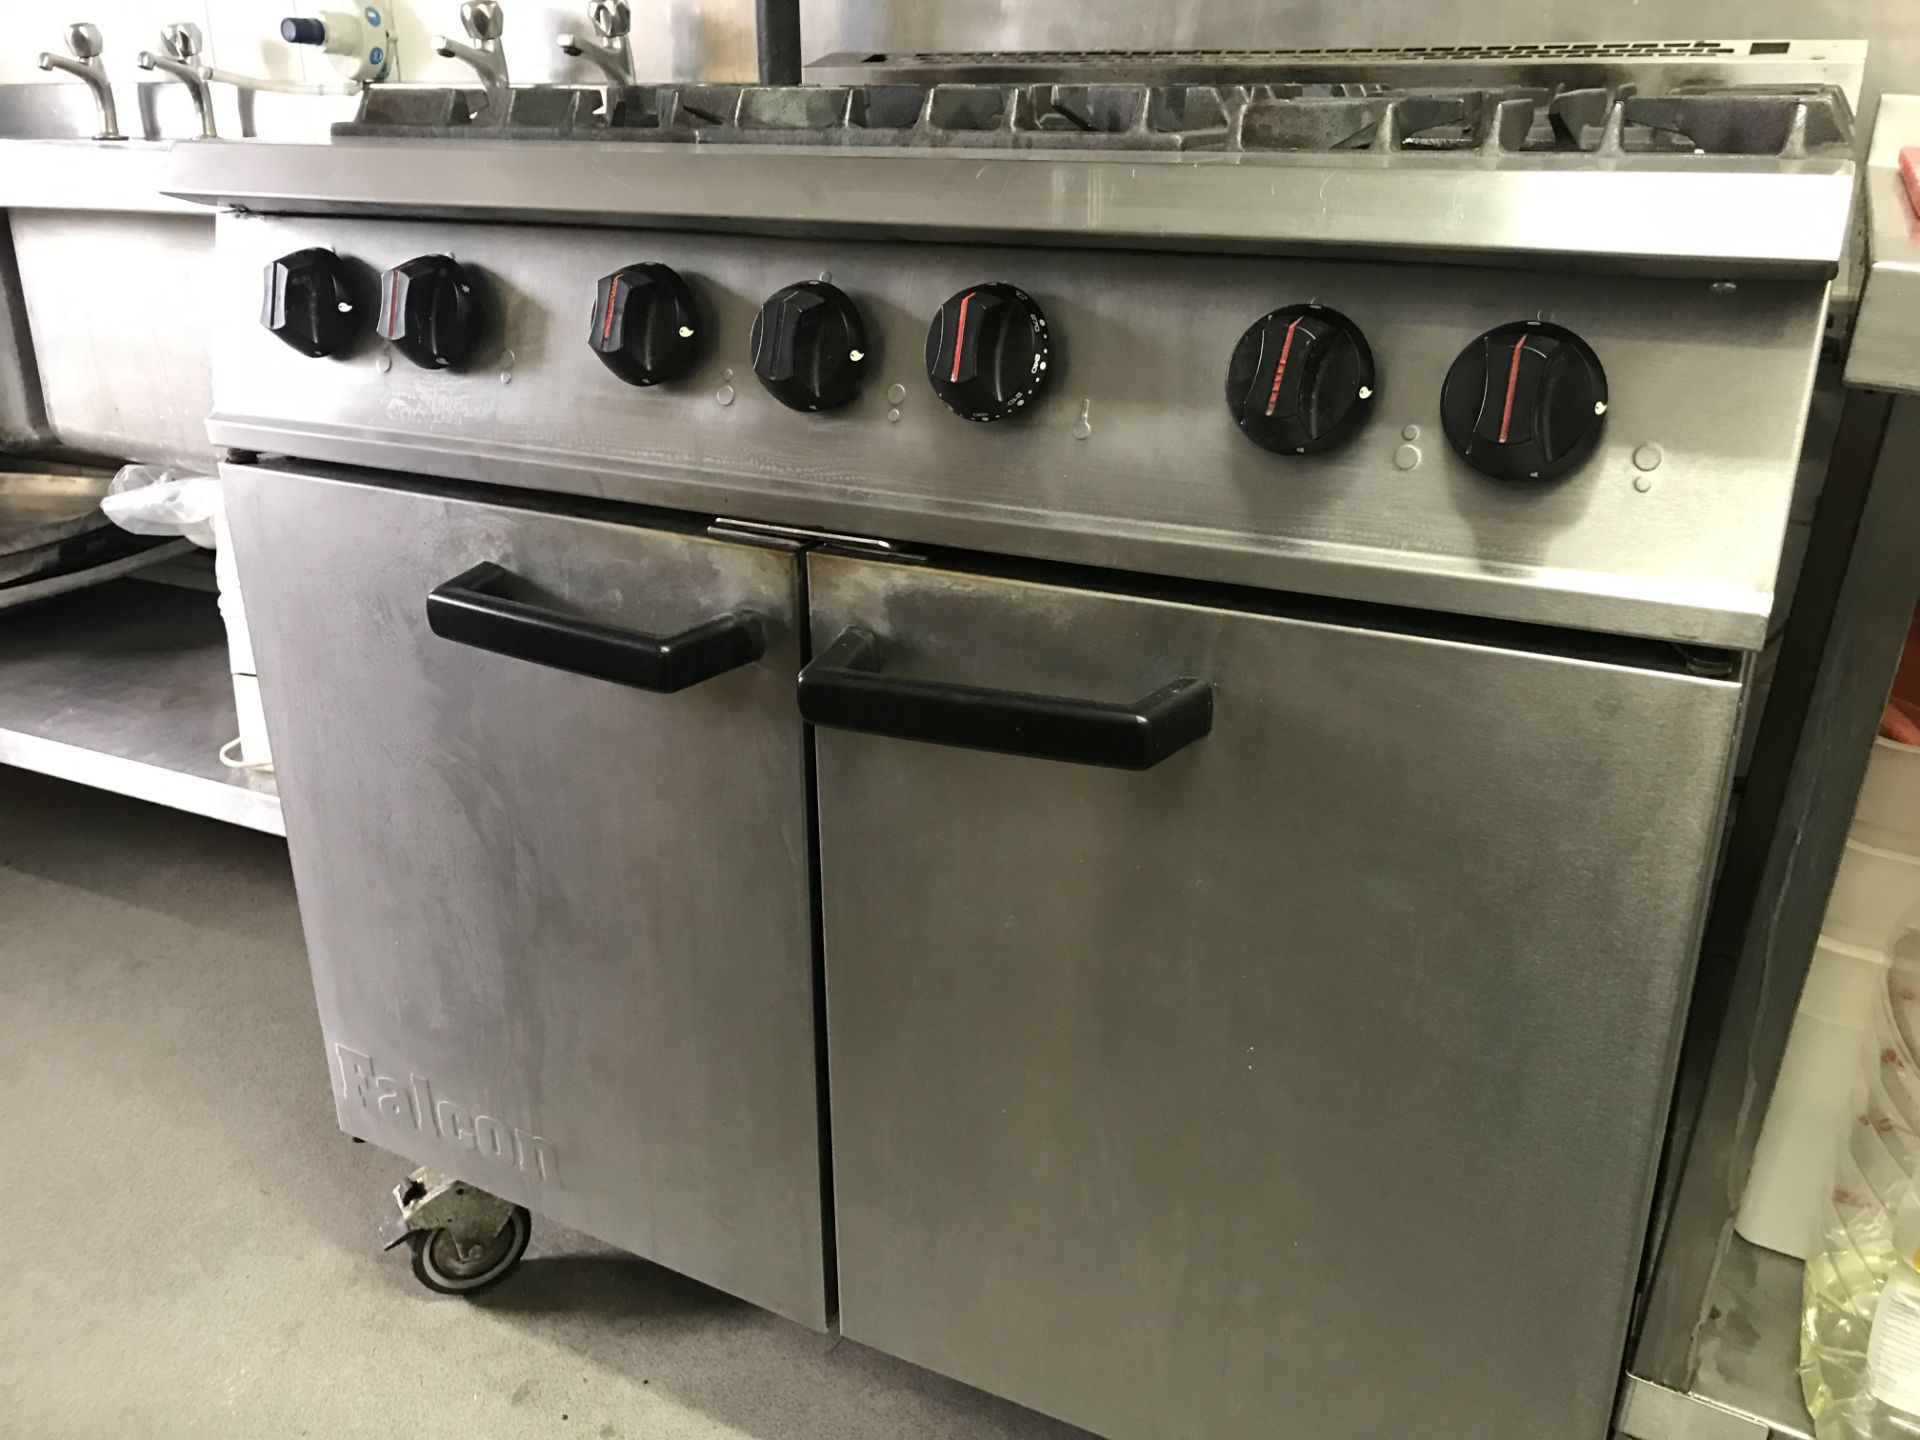 Falcon 6 Burner Gas Range with Oven - Image 4 of 5